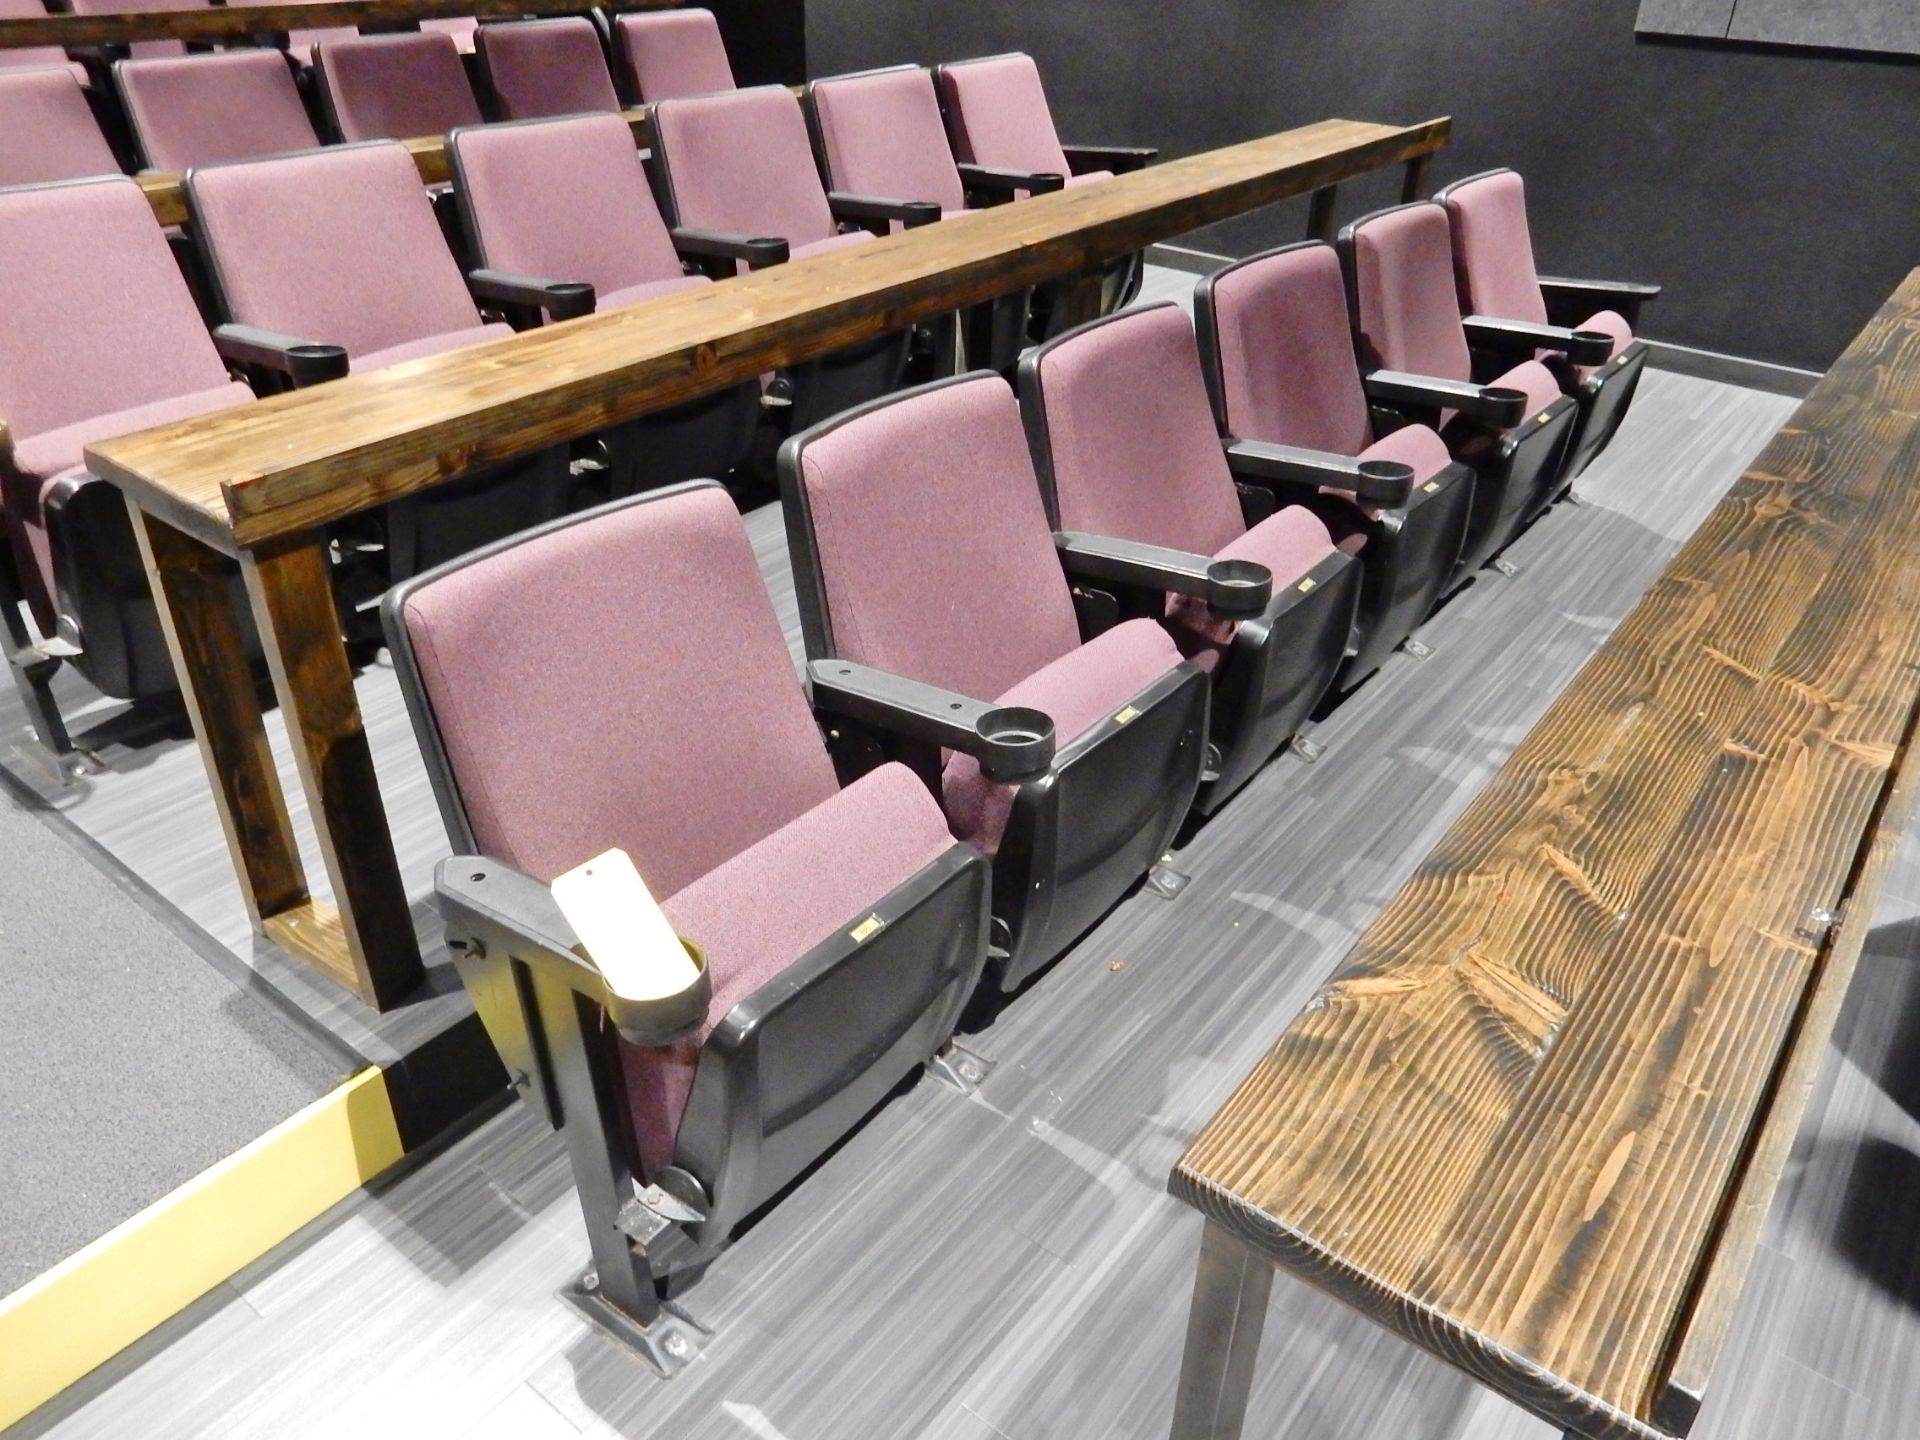 INDUSTRIAS IDEAL 6-SEAT FABRIC COVERED INCLINABLE BACK THEATER SEATS